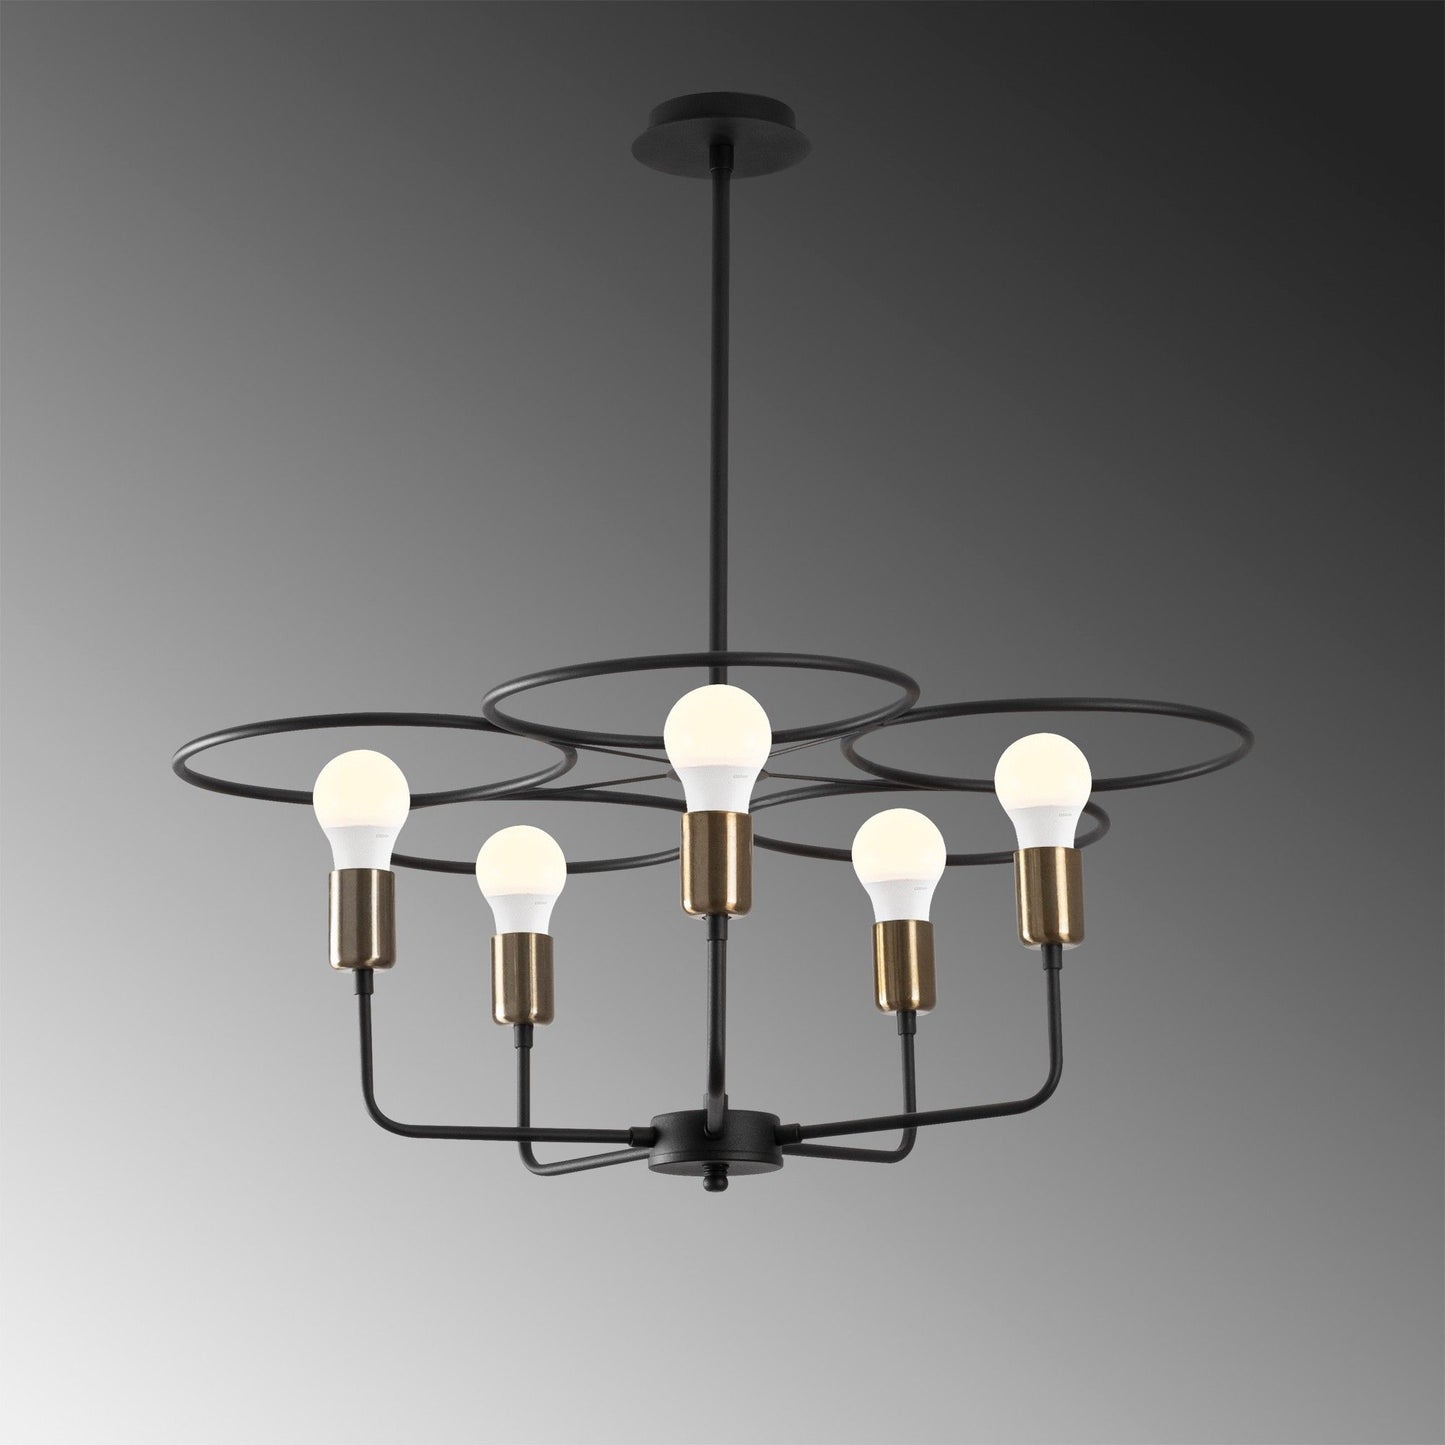 Circle - 1356 - Chandelier